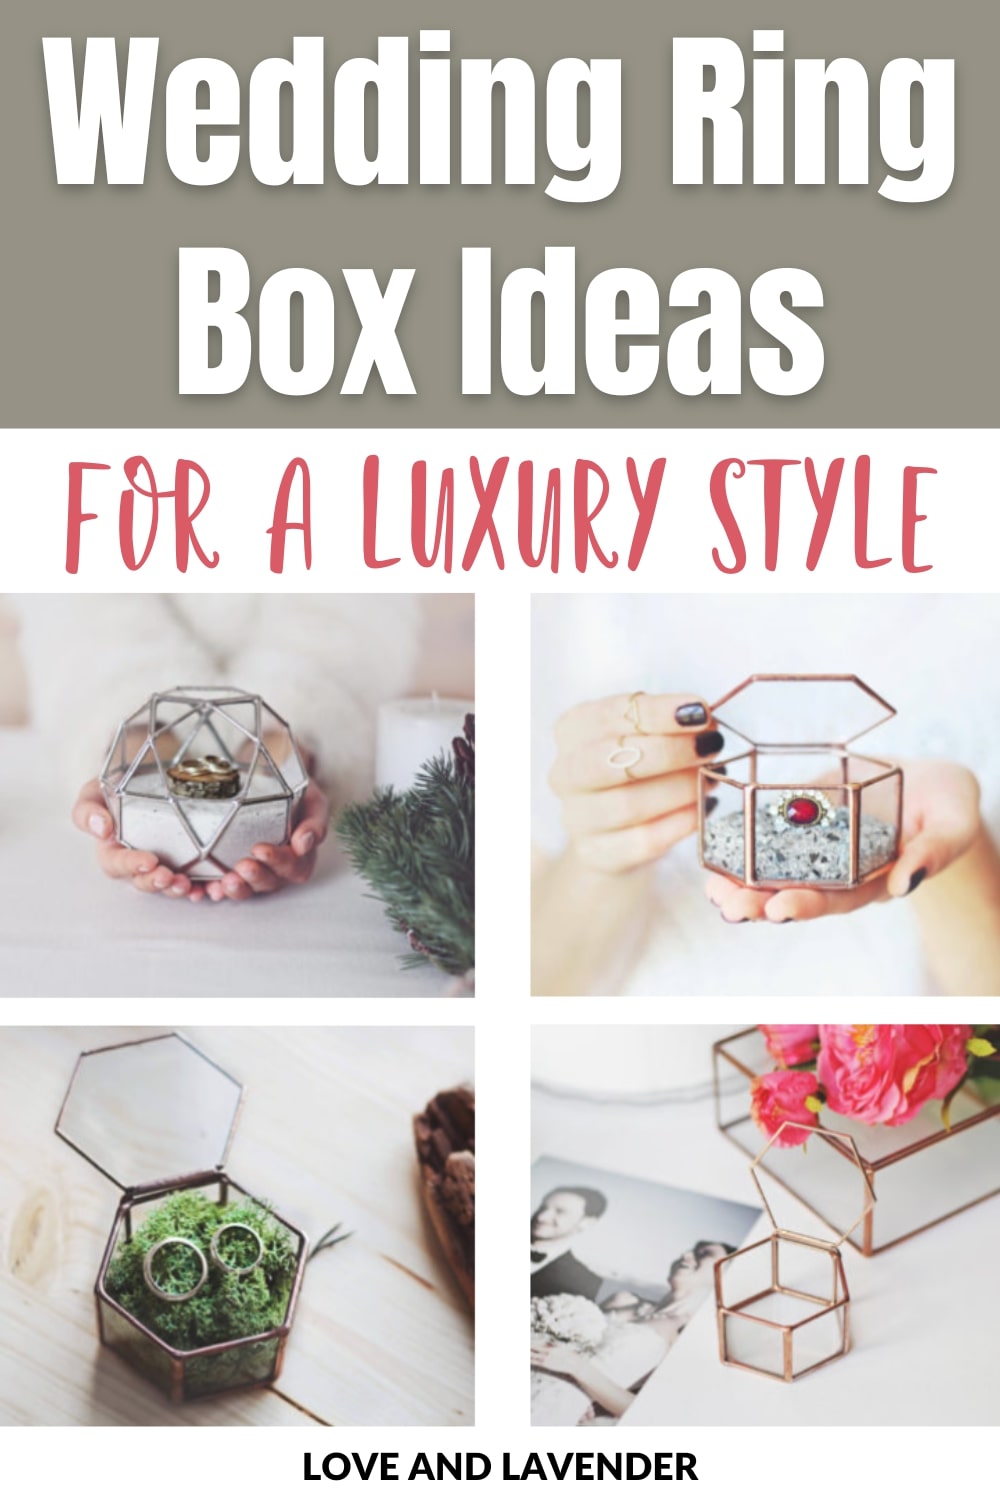 13 Wedding Ring Box Ideas for a Luxury Style